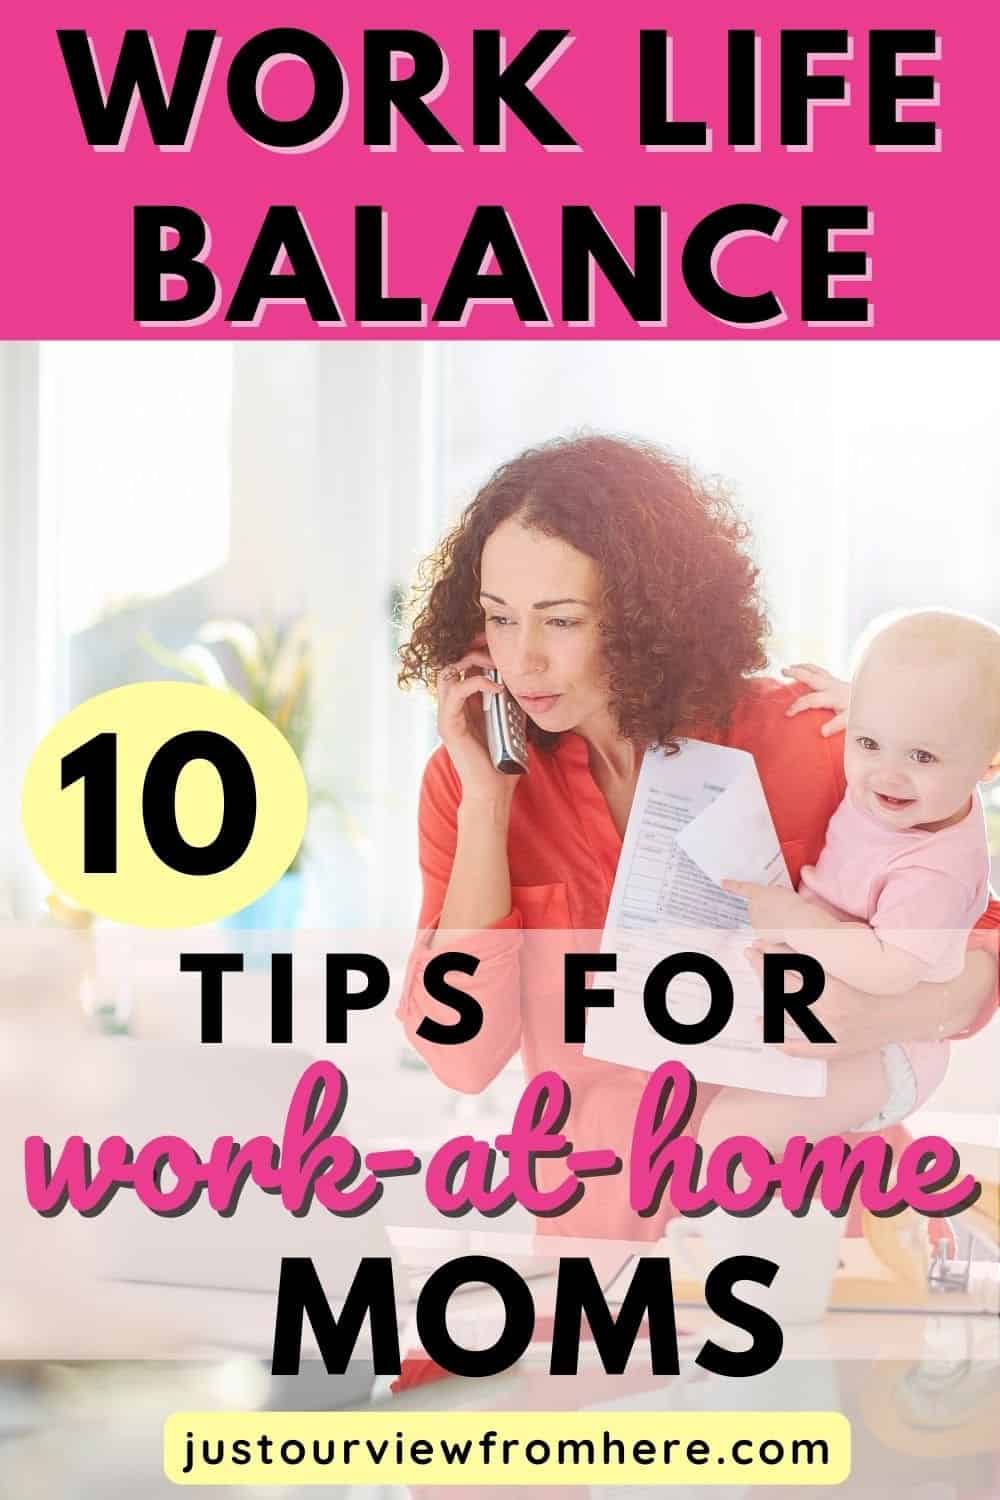 woman on the phone looking at a laptop while holding a smiling baby, text overlay work life balance 10 tips for work at home moms